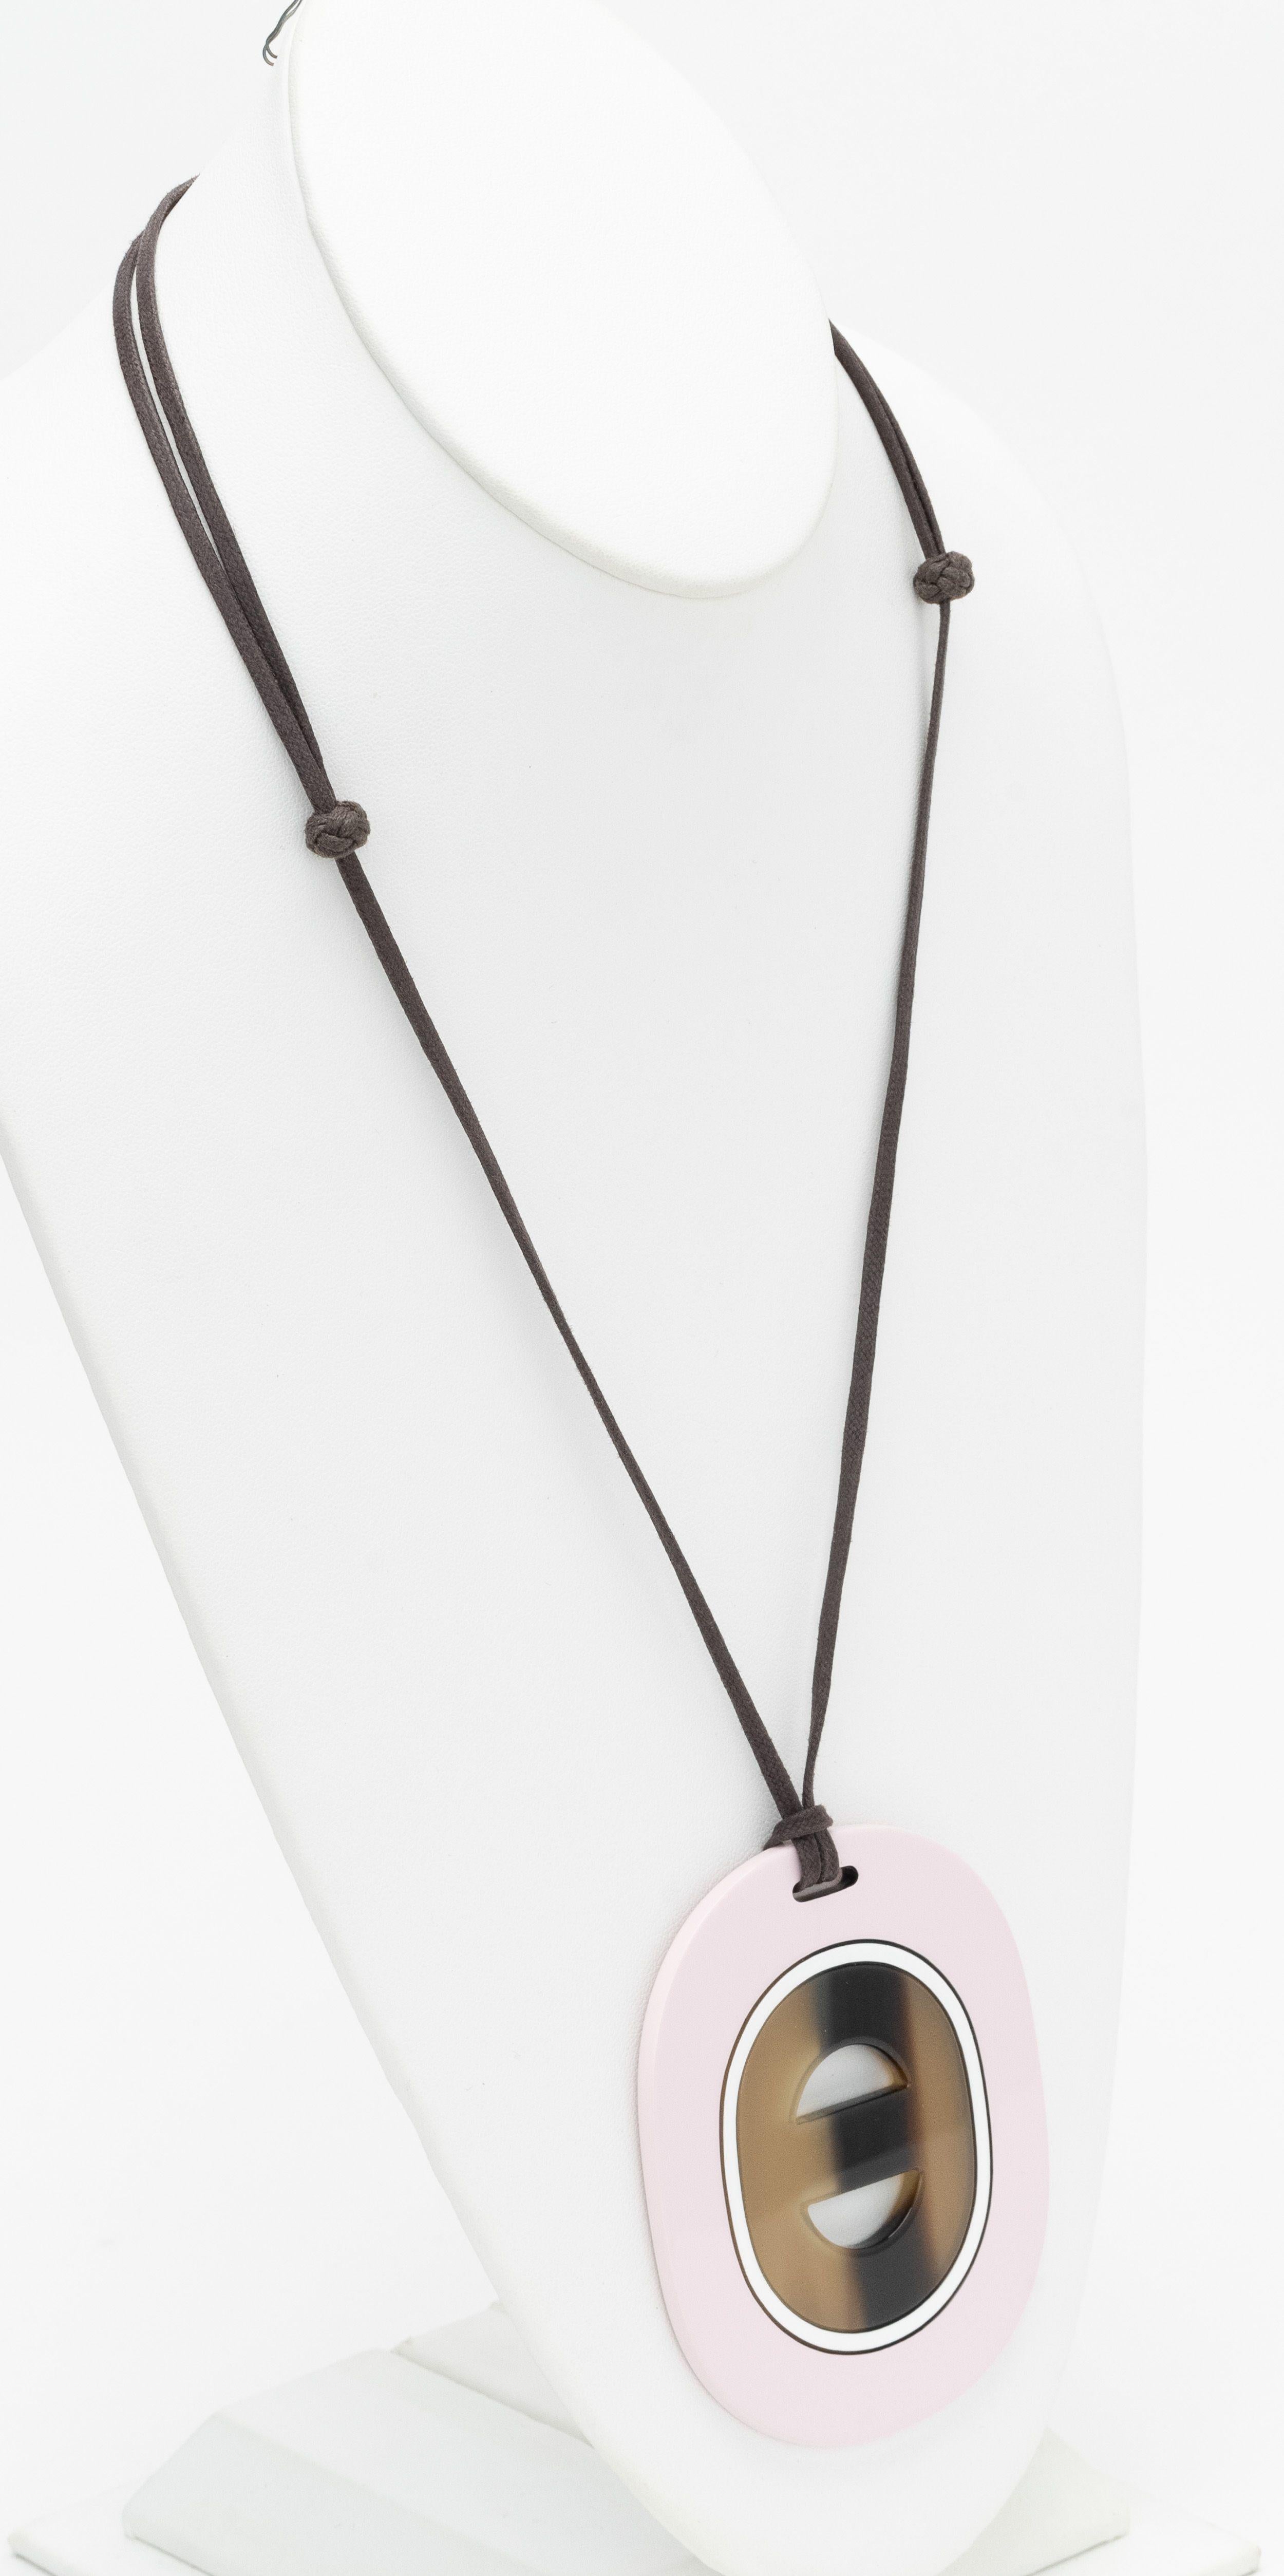 Hermès Buffalo Necklace in rose. In the center of the oval is horn framed with rose lacquered horn. The pendant is 3.25 x 2.75